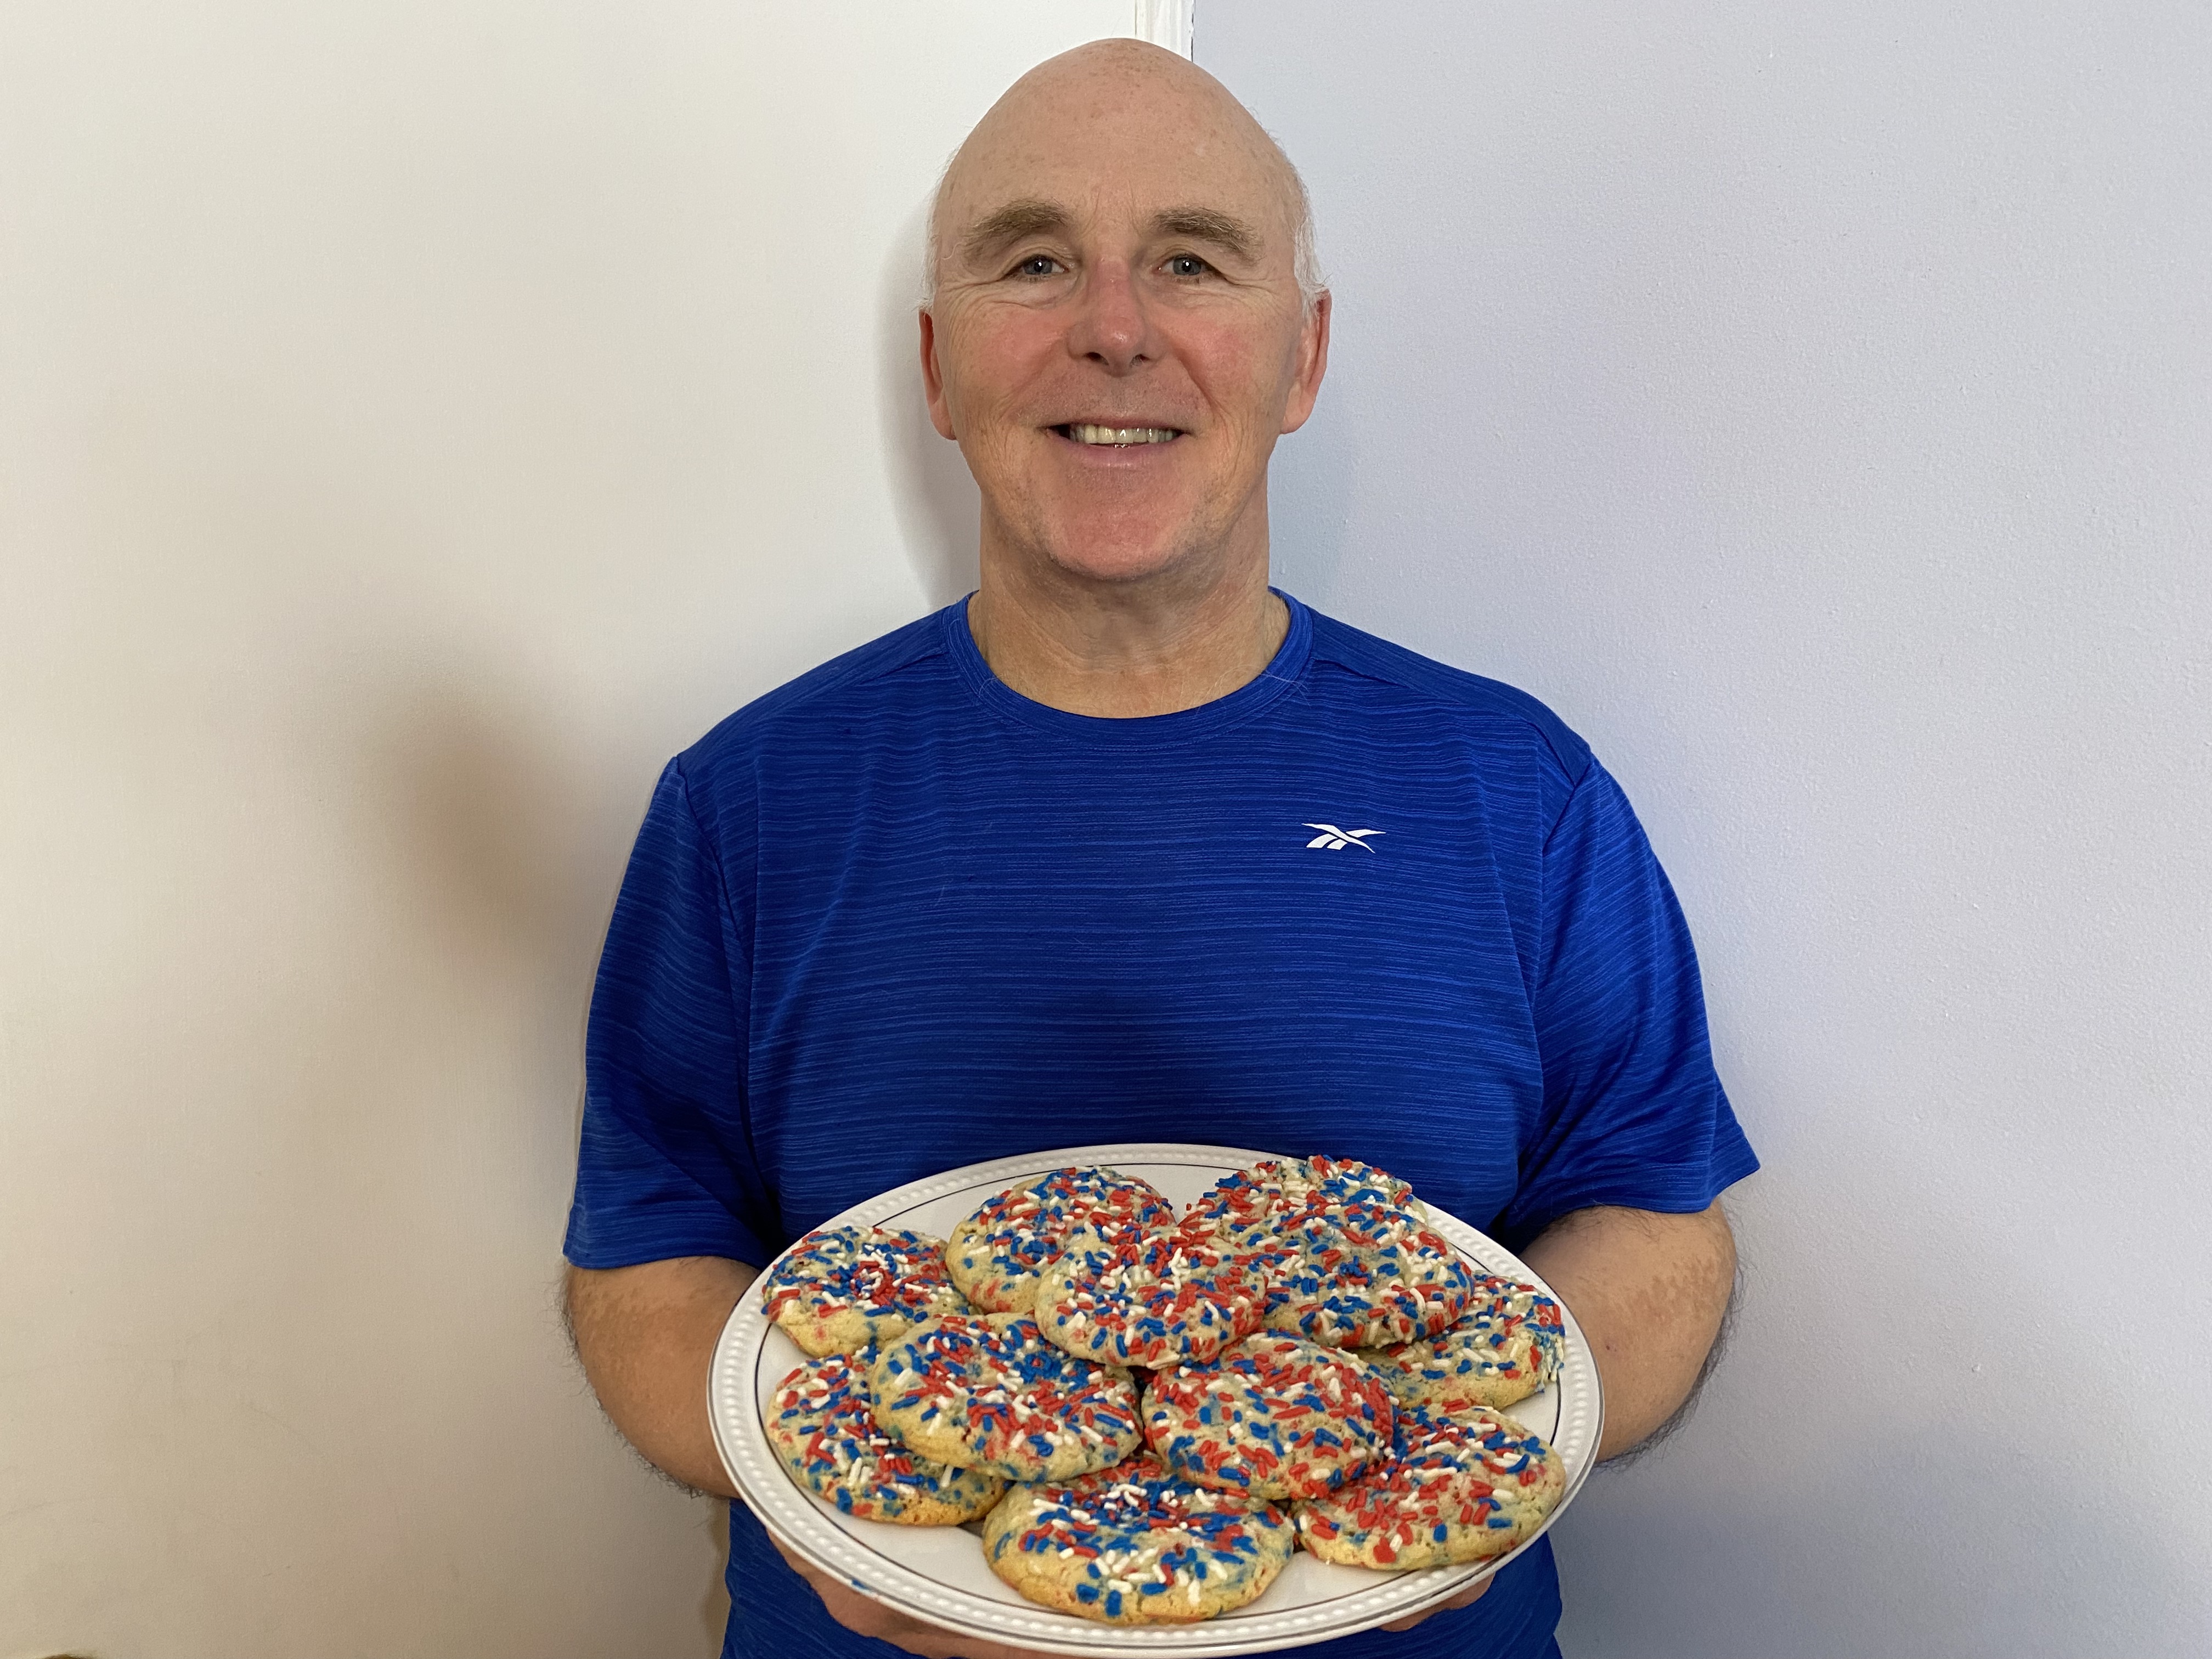 A photo of Chef Rob holding a plate of butter cookies with red, white and blue sprinkles on top.